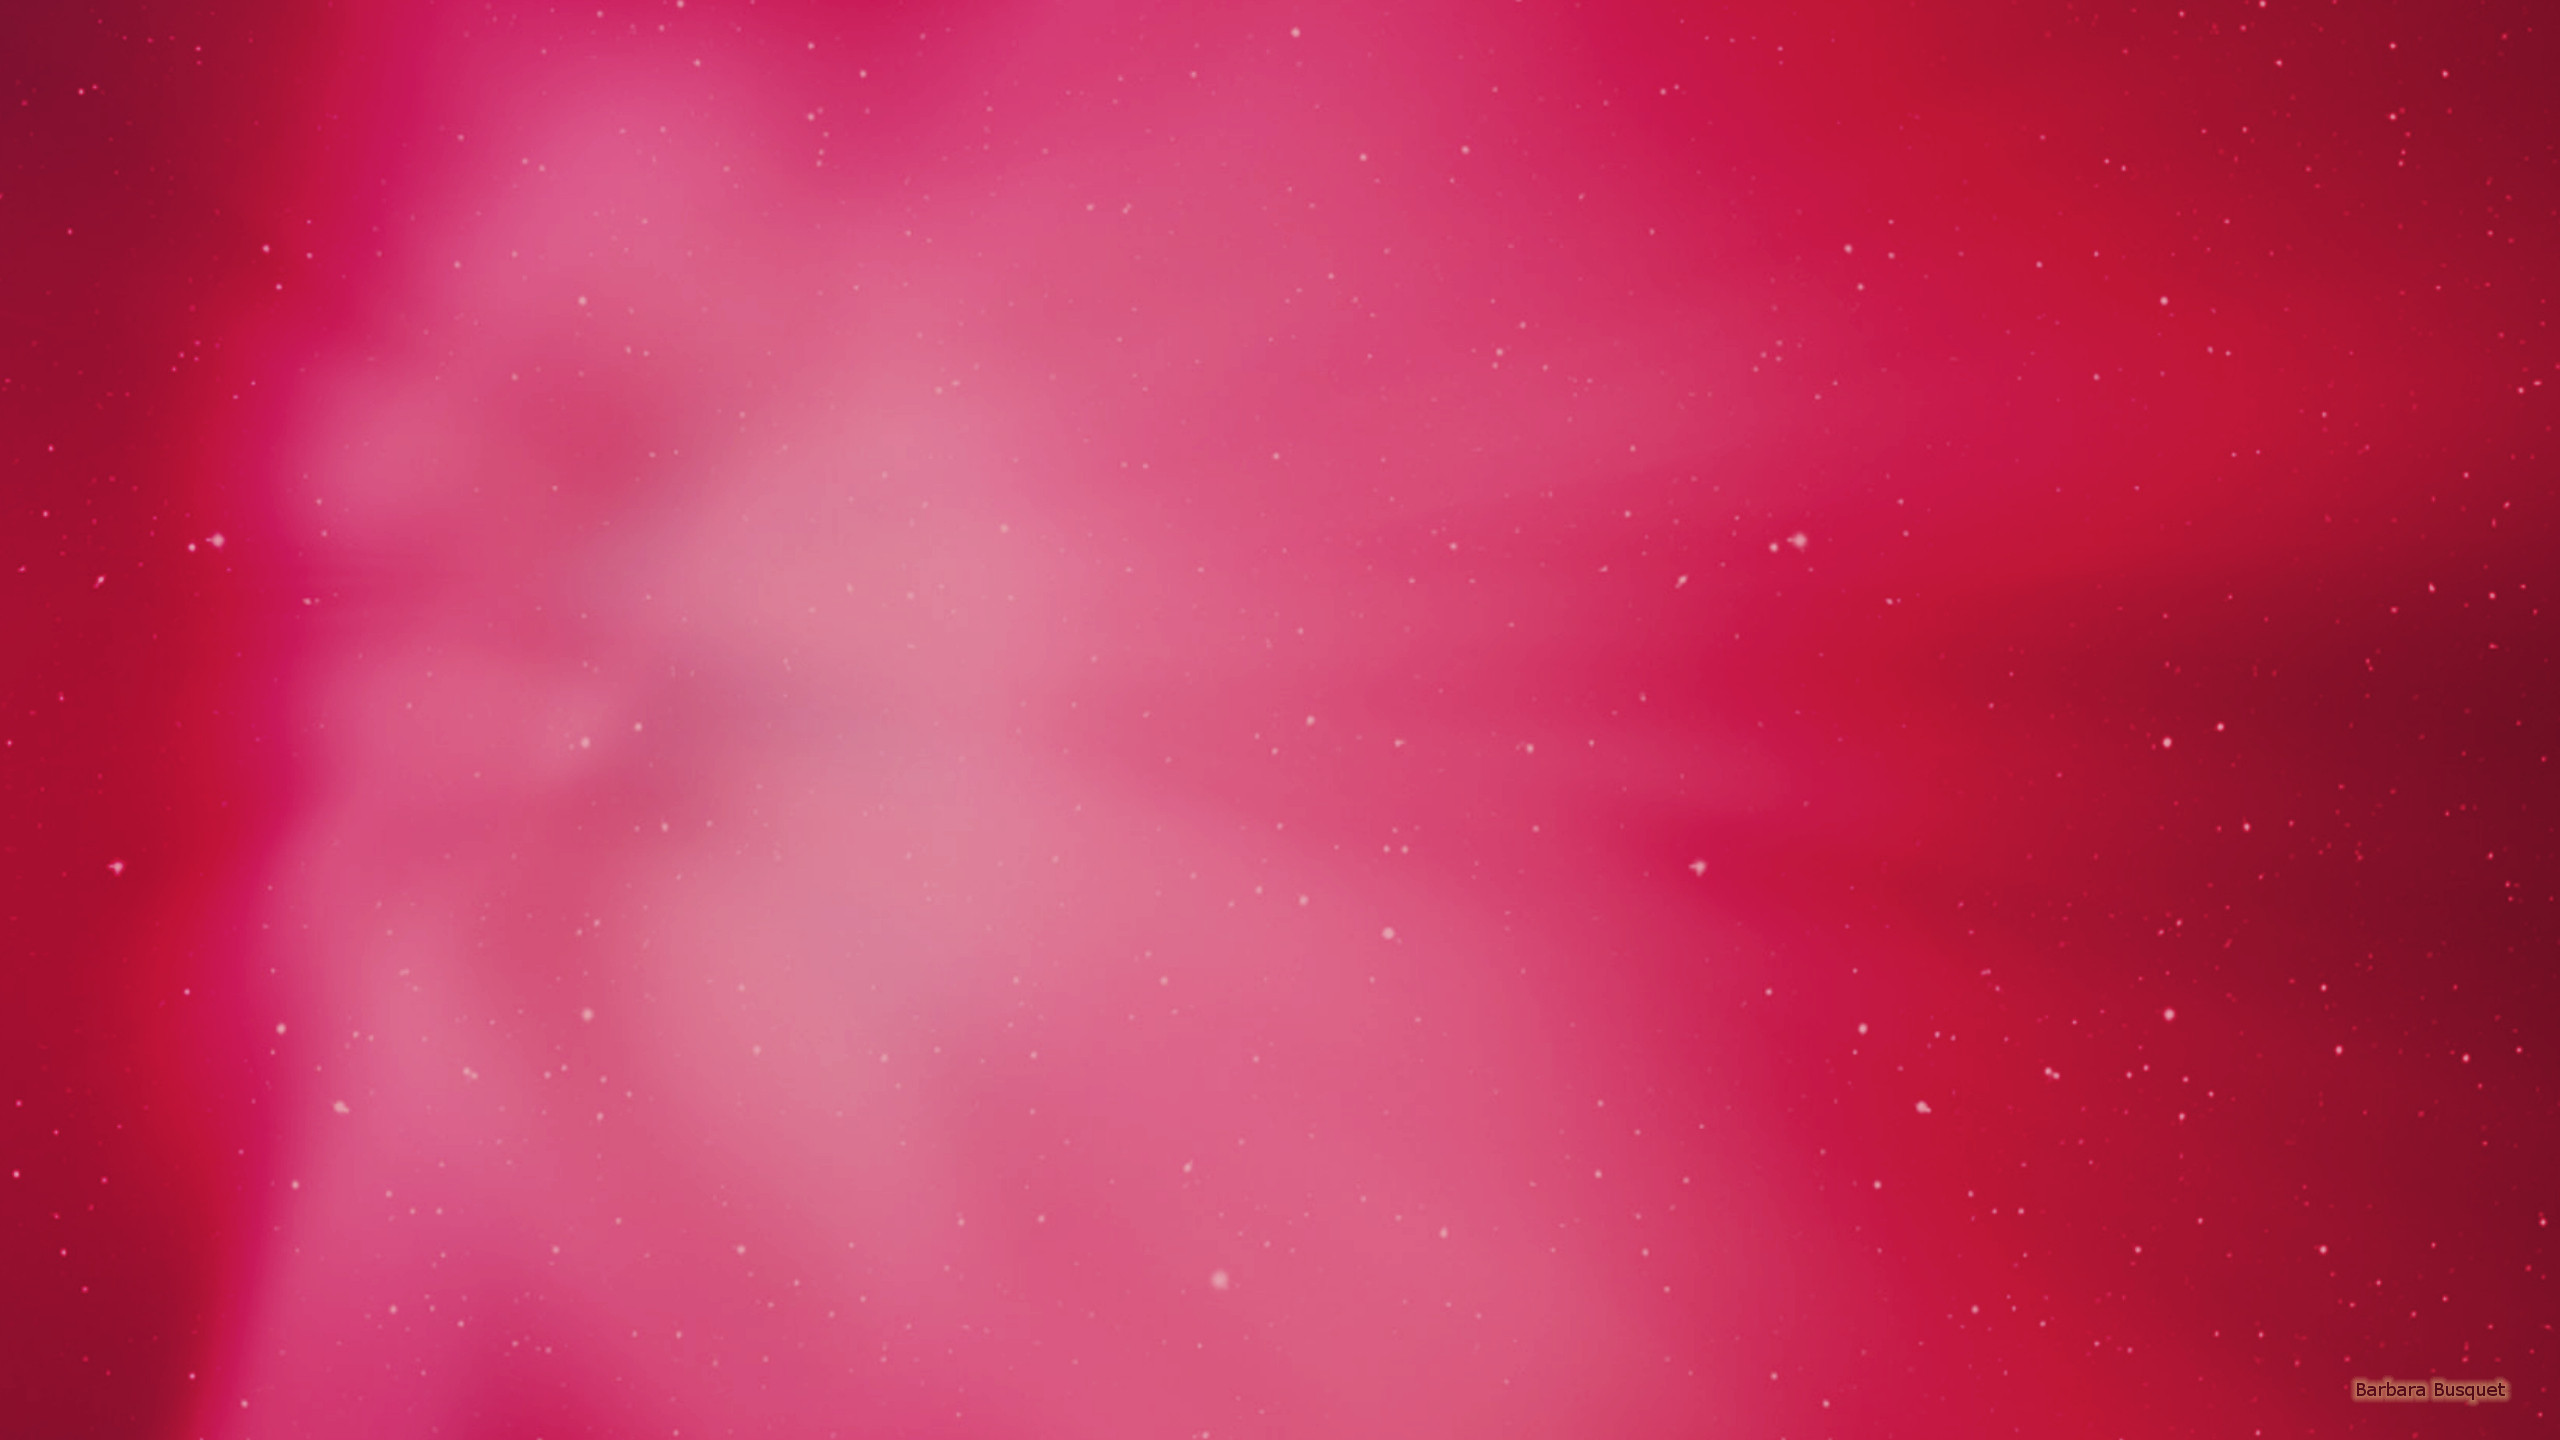 Red galaxy wallpaper with stars and gas clouds